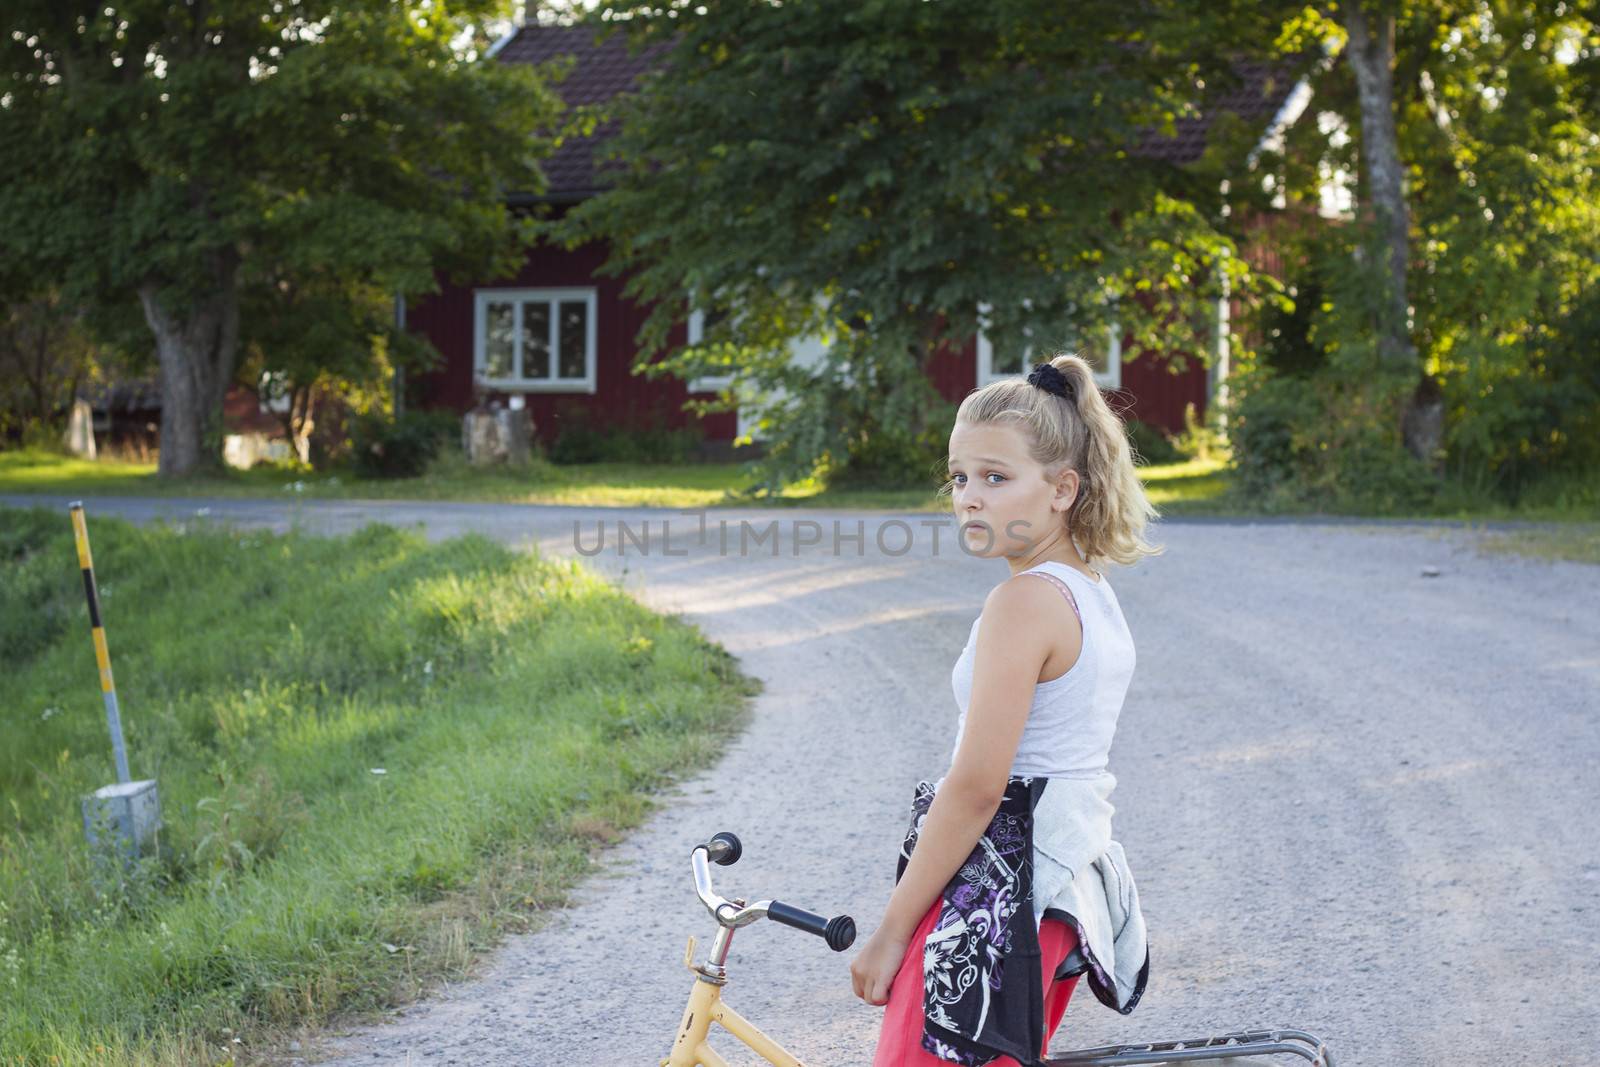 Child on bicycle on country road by annems